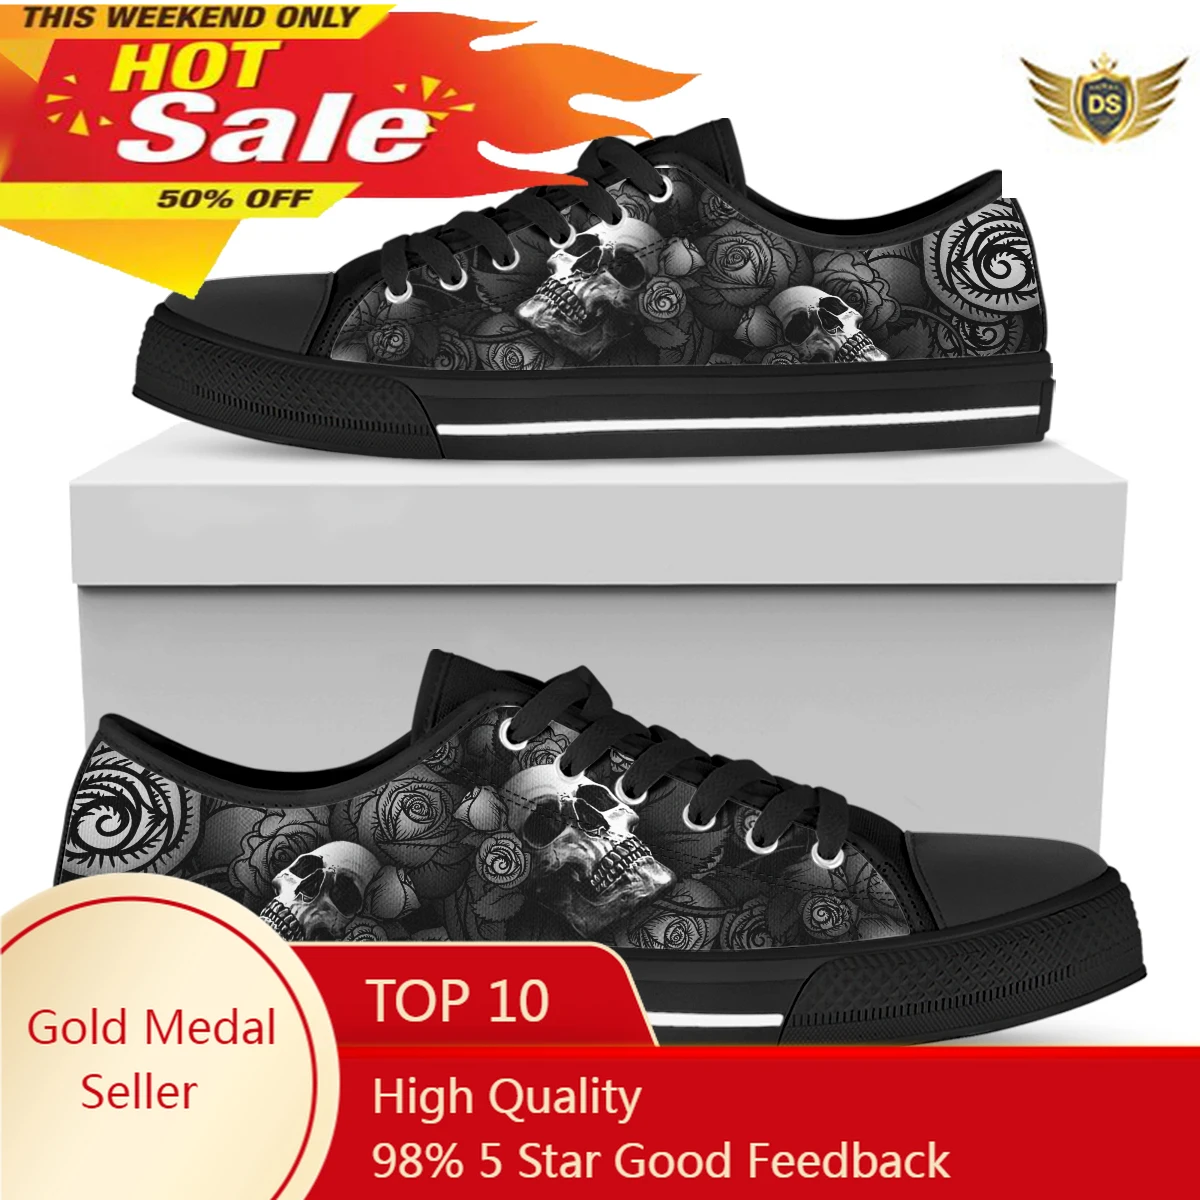 Retro Rose Skull Grey Autumn Women's Shoes Trend Fashion Female Low-Top Flats Shoes Women Sneakers Casual Shoes autumn new women shoes lace up ladies flats sudes female spring vulicanized shoes fashion woman comfortable casual shoes